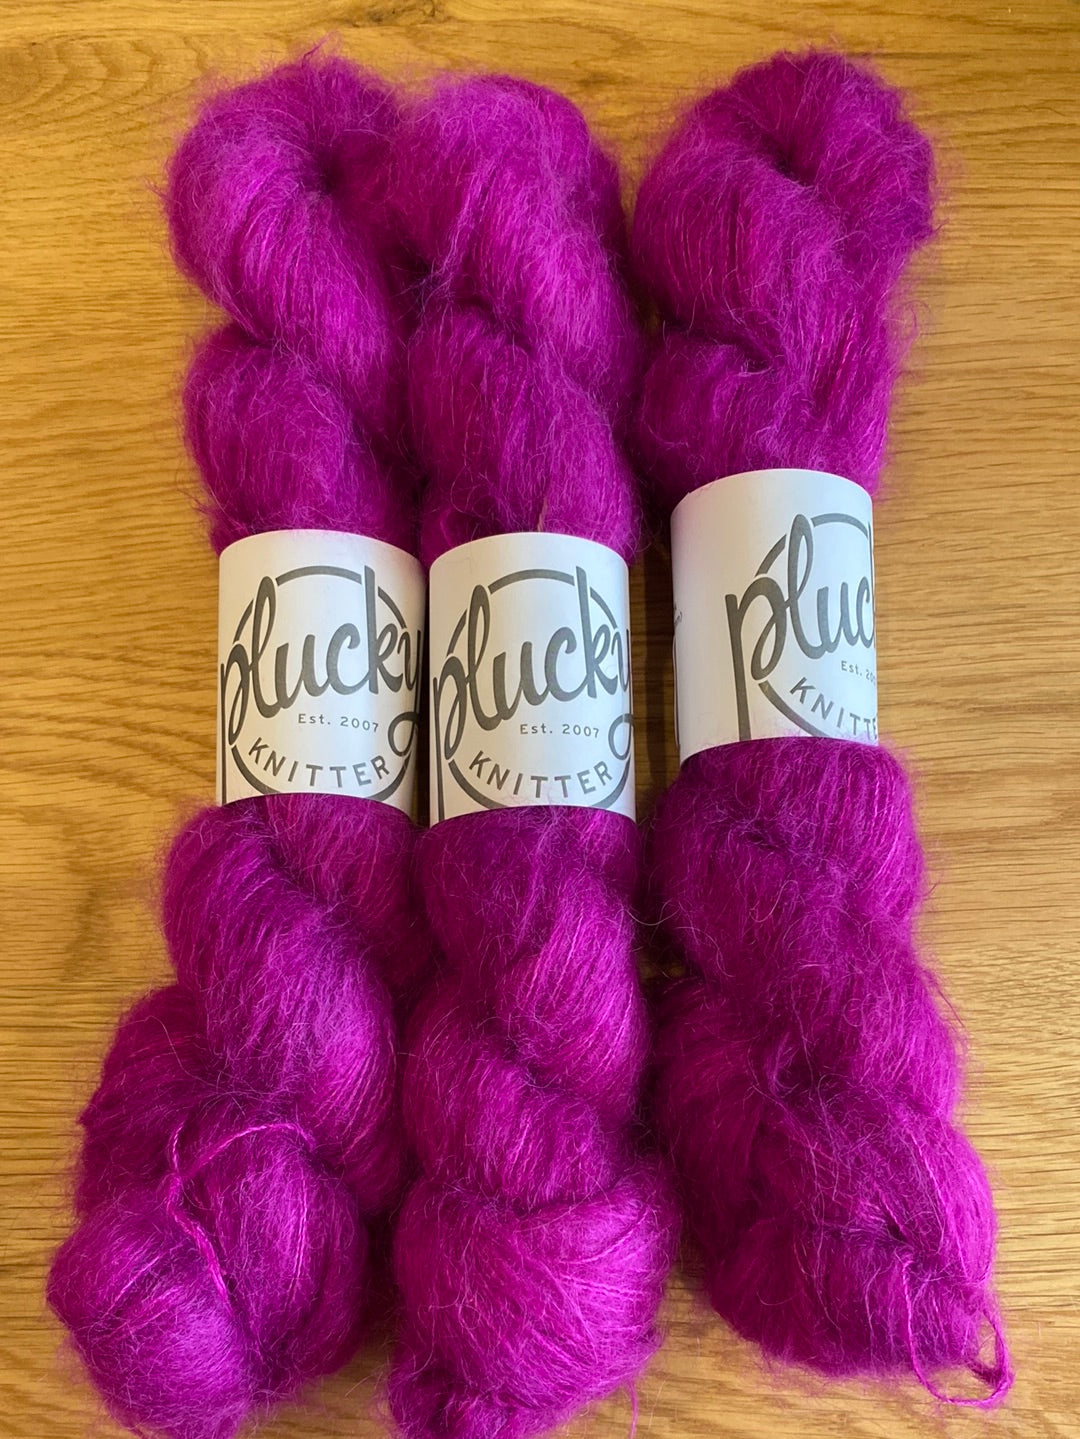 Plume Lace by Plucky Knitter